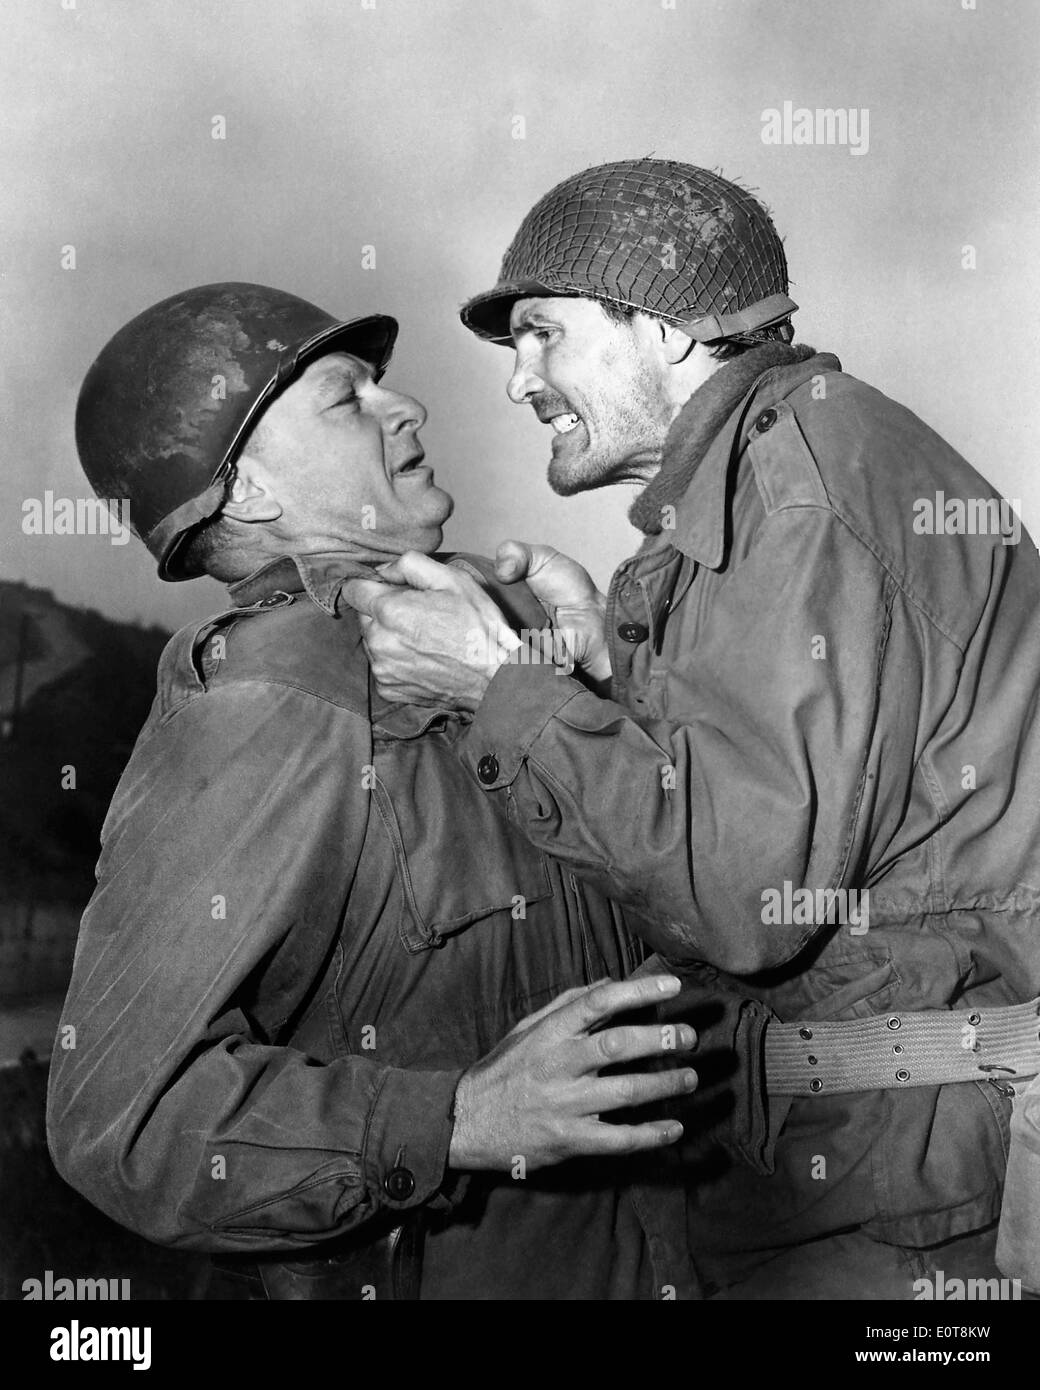 Eddie Albert and Jack Palance, on-set of the Film, 'Attack', 1956 Stock Photo